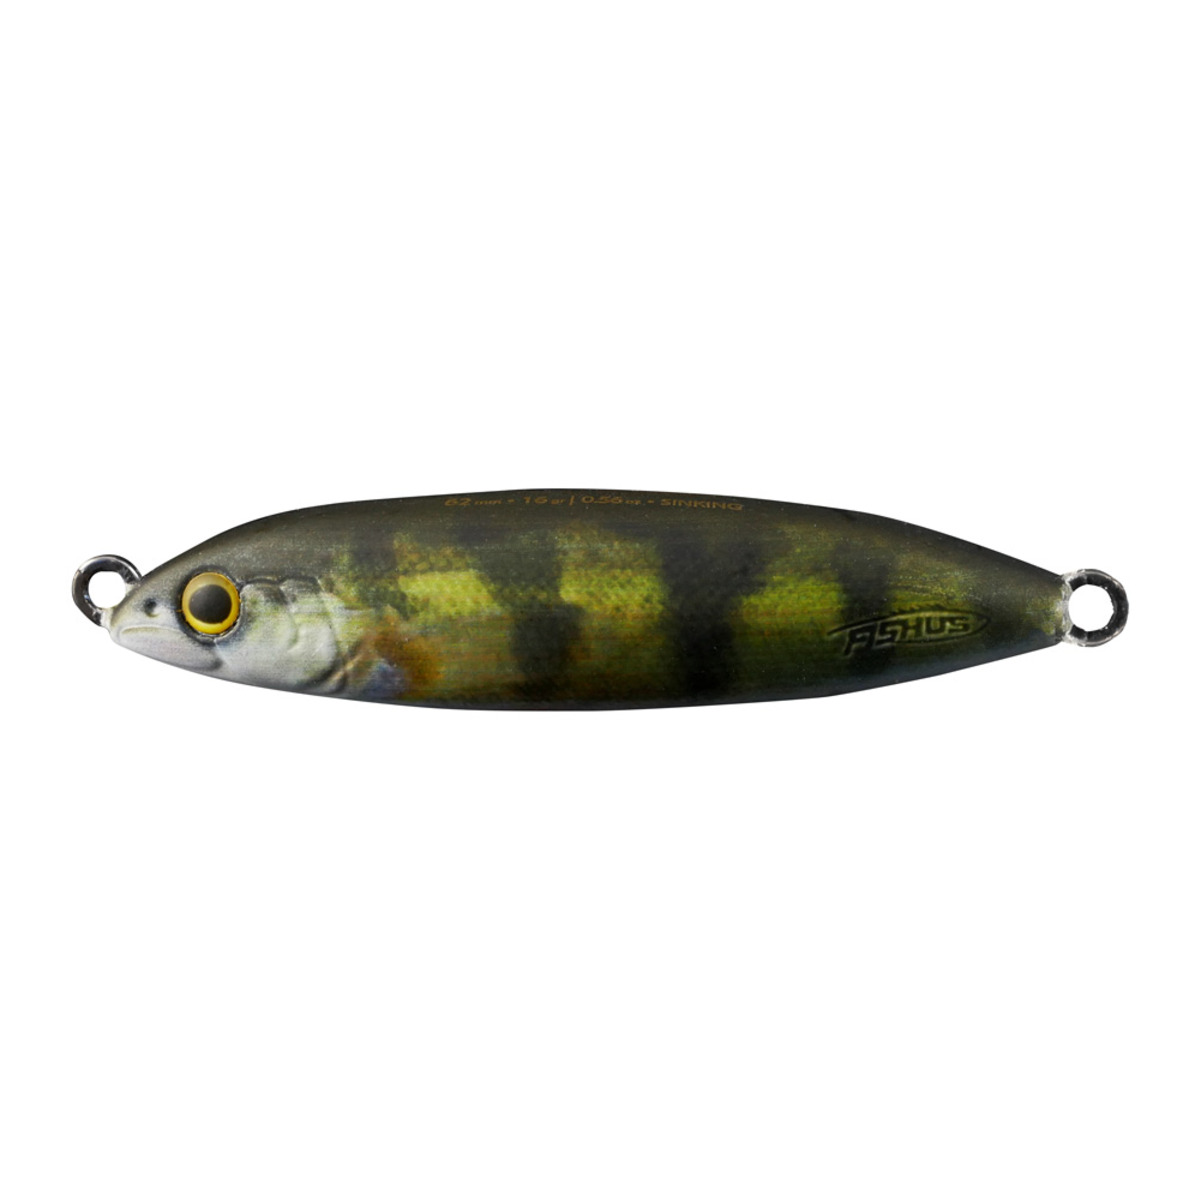 Fishus Wobly 62 - Perch